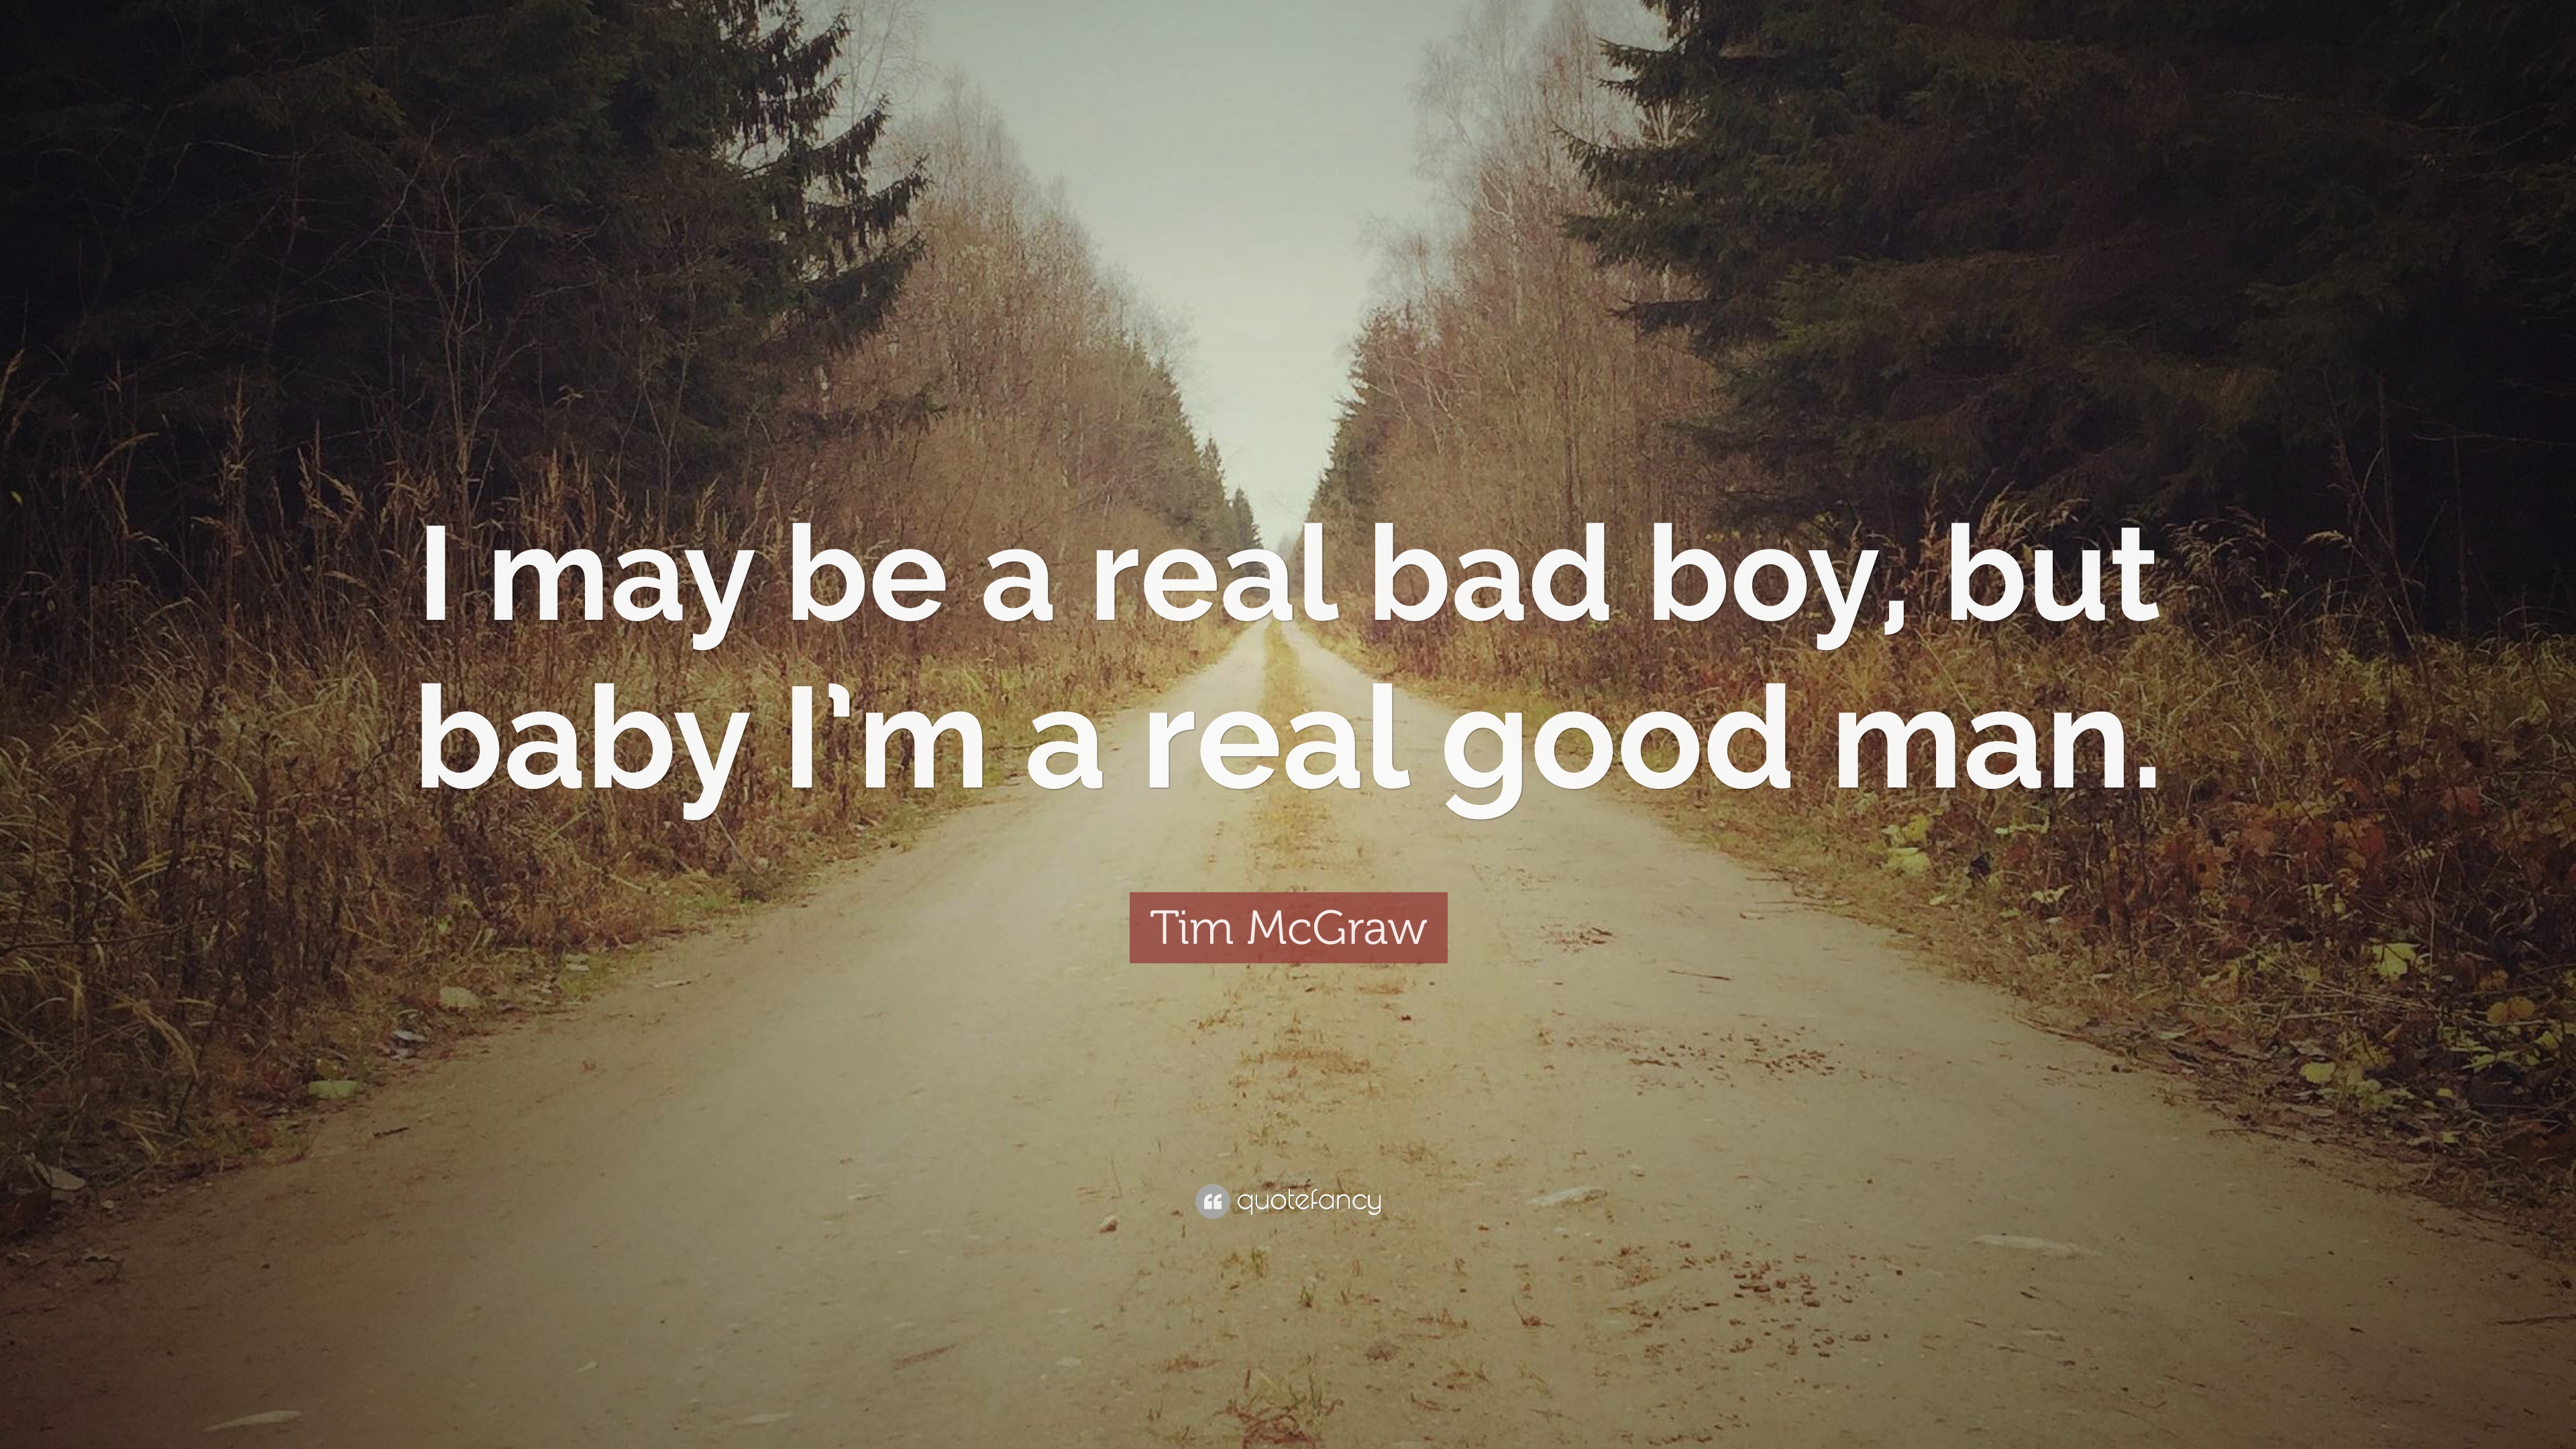 Tim McGraw Quote: “I may be a real bad boy, but baby I'm a real